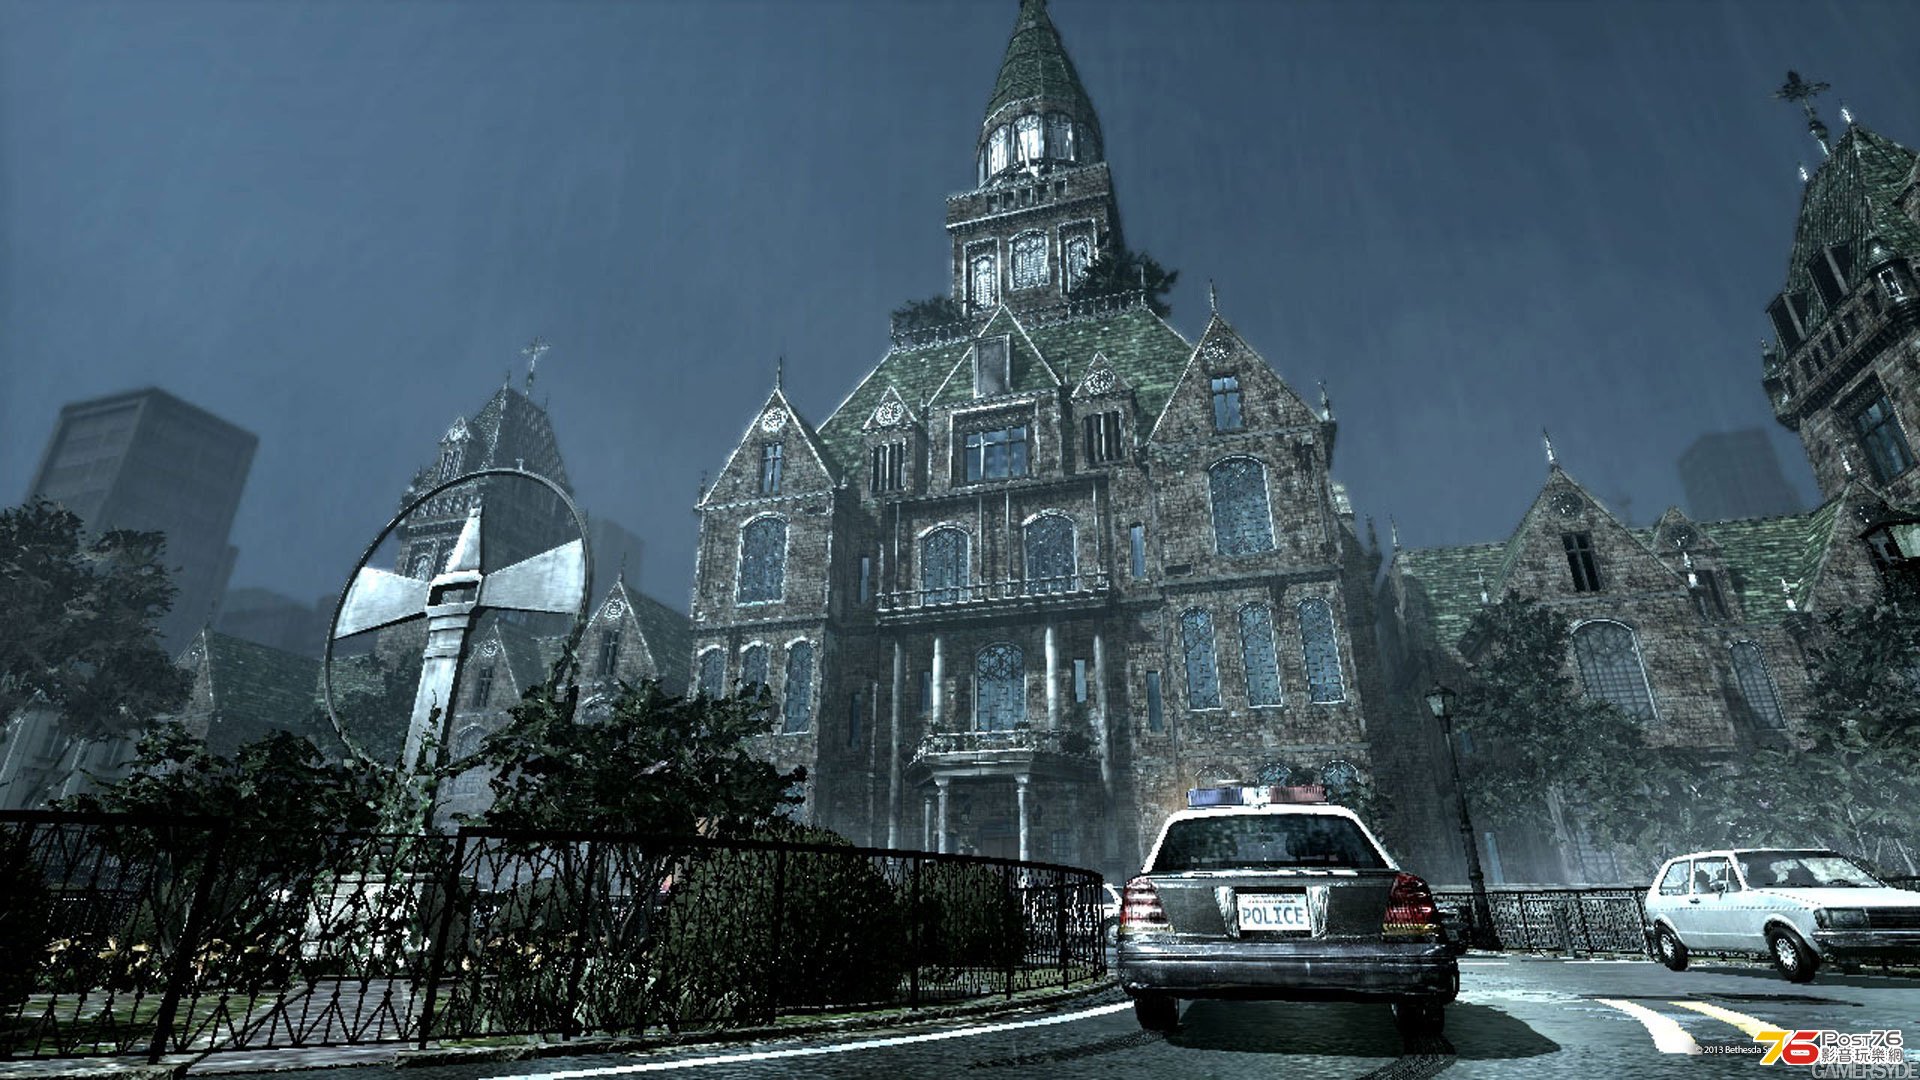 image_the_evil_within-21913-2706_0001.jpg